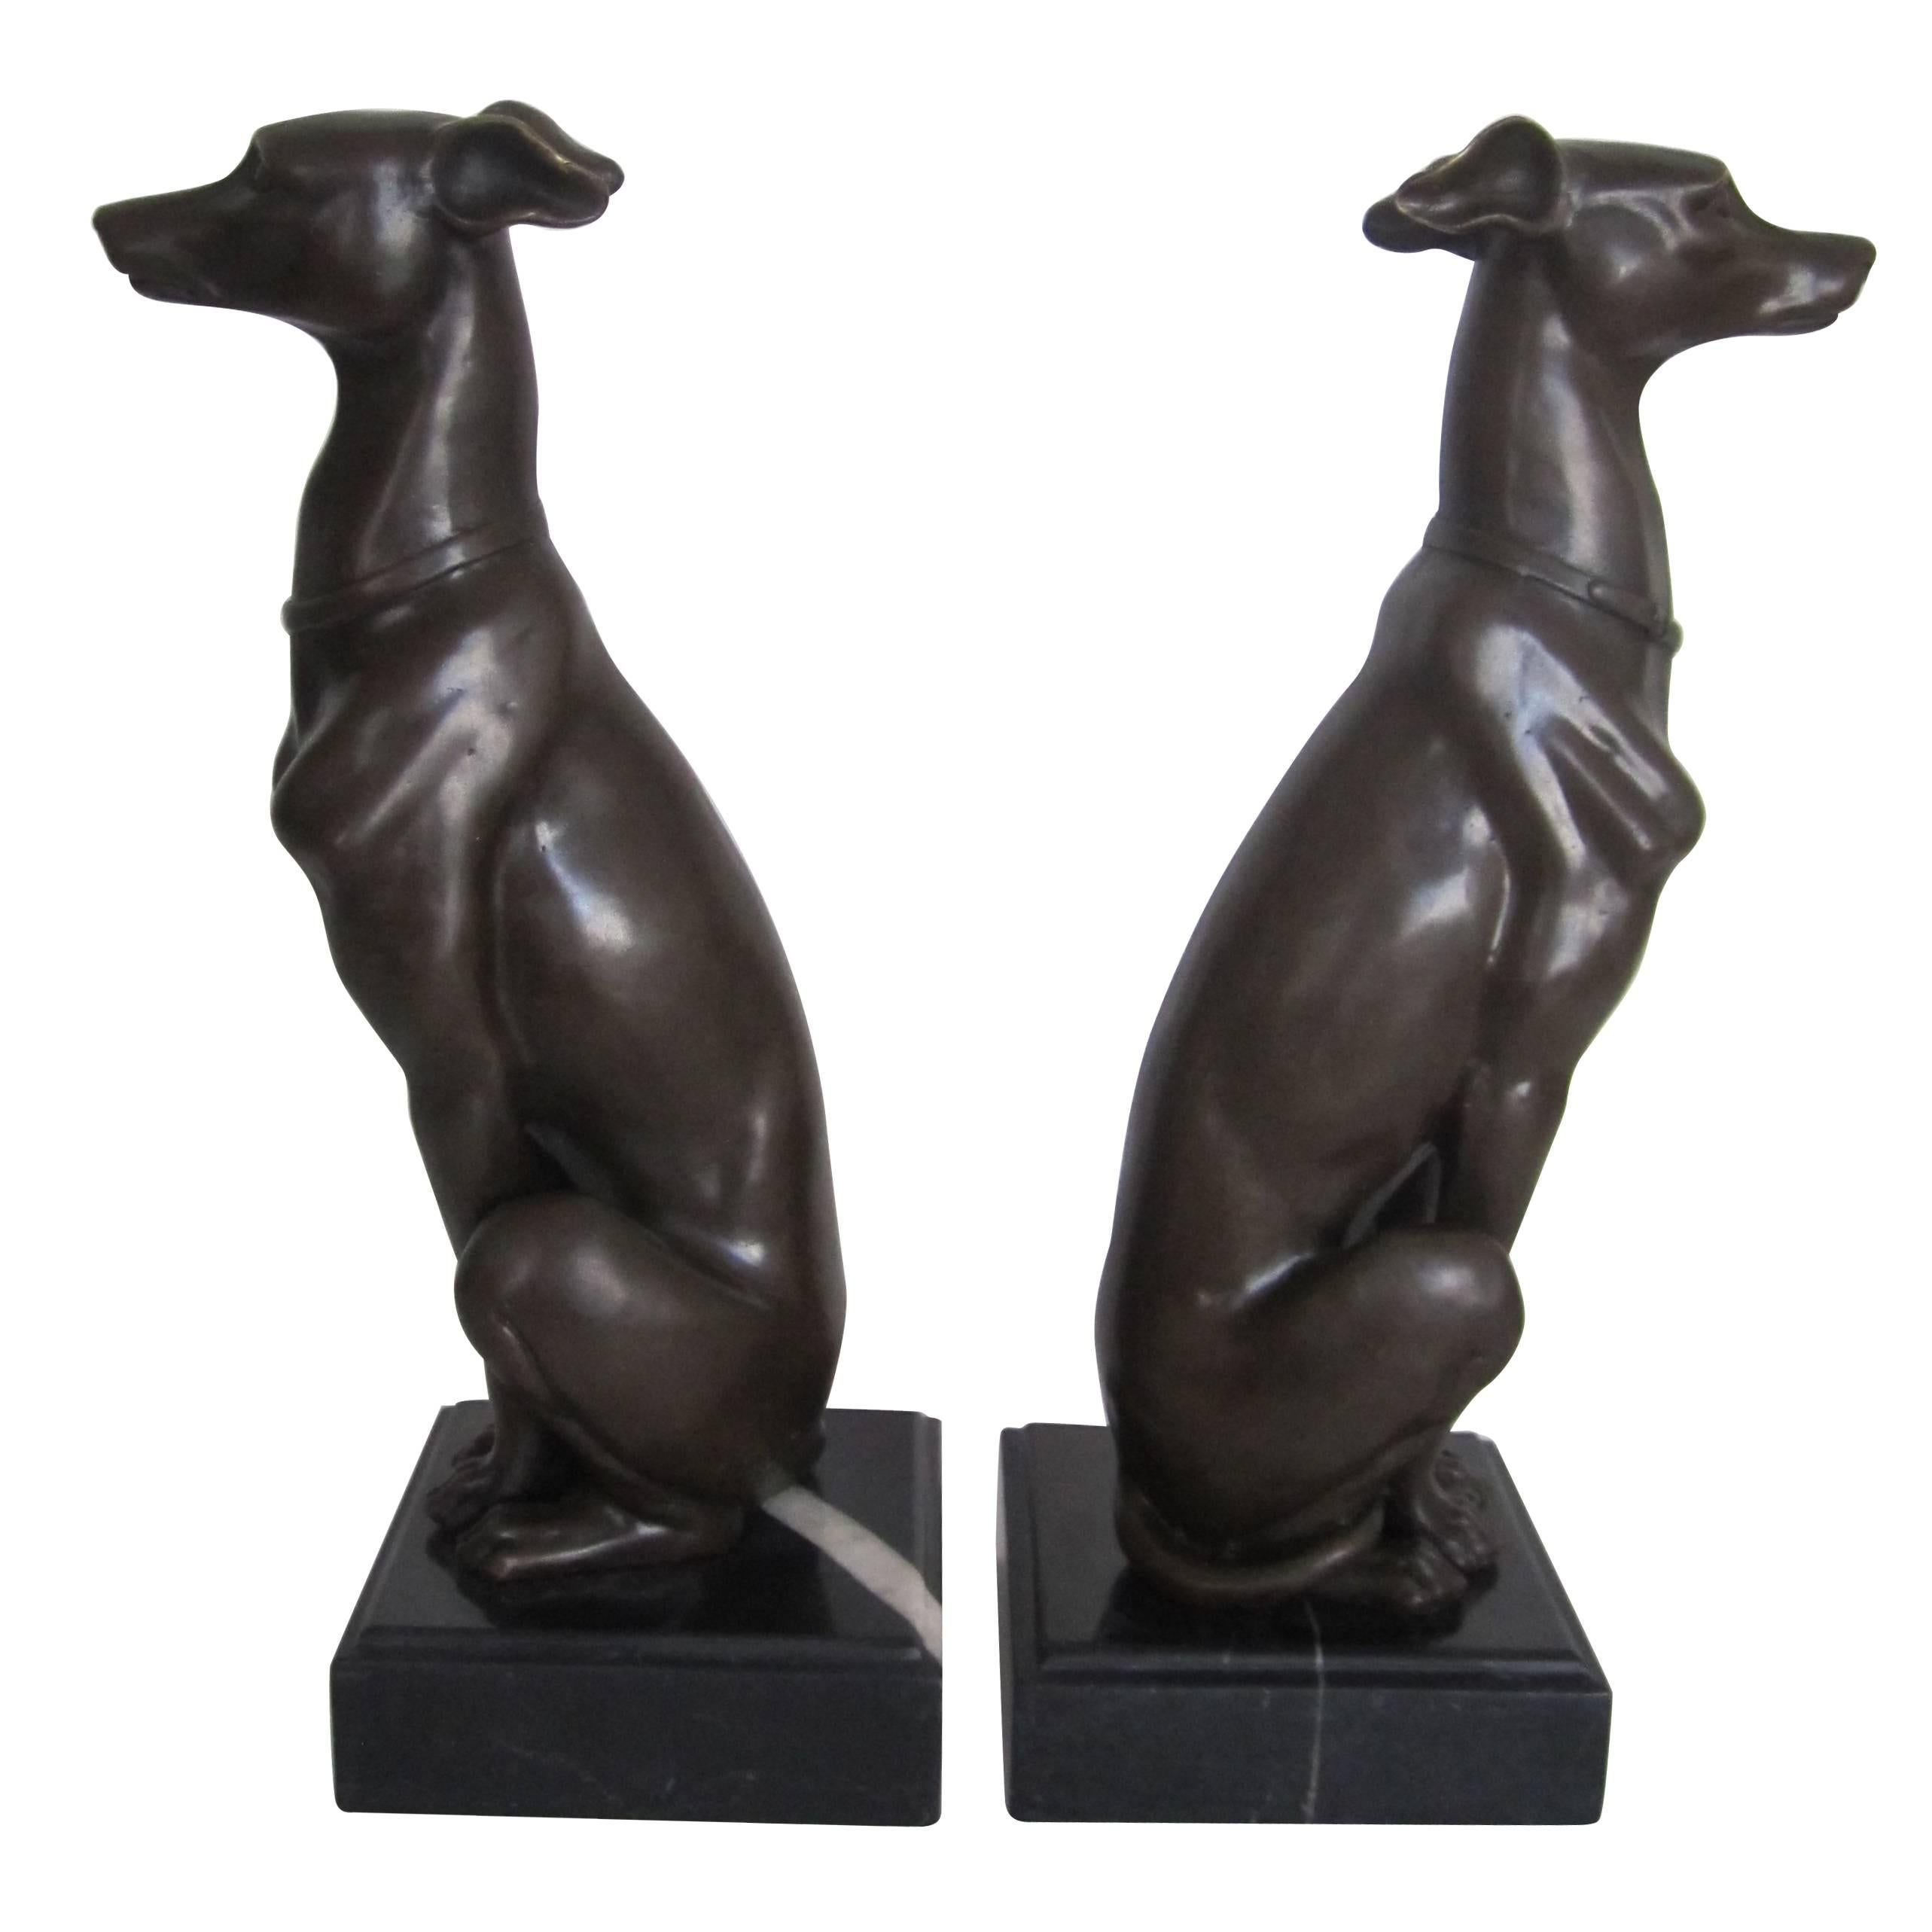 Art Deco Bronze and Marble Whippet or Greyhound Dog Sculpture Bookends